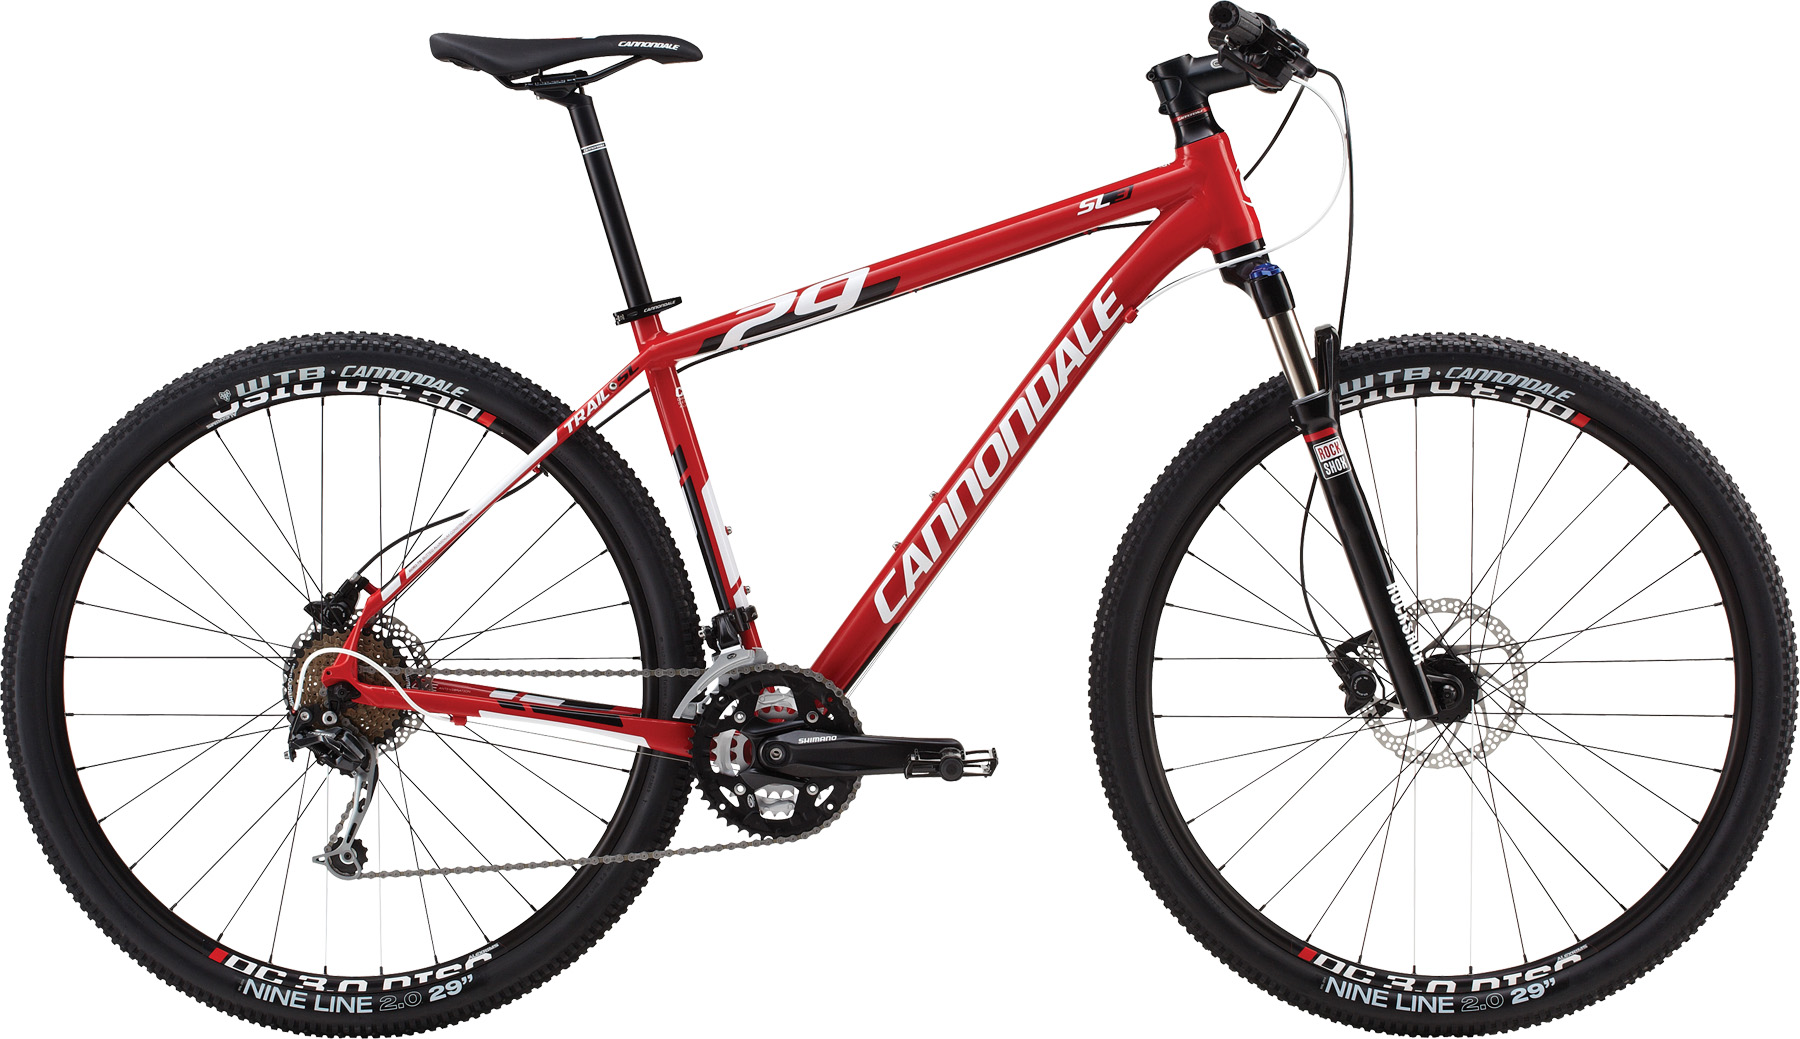 Велосипед 29 "Cannondale TRAIL SL 3 рама - L 2014 red